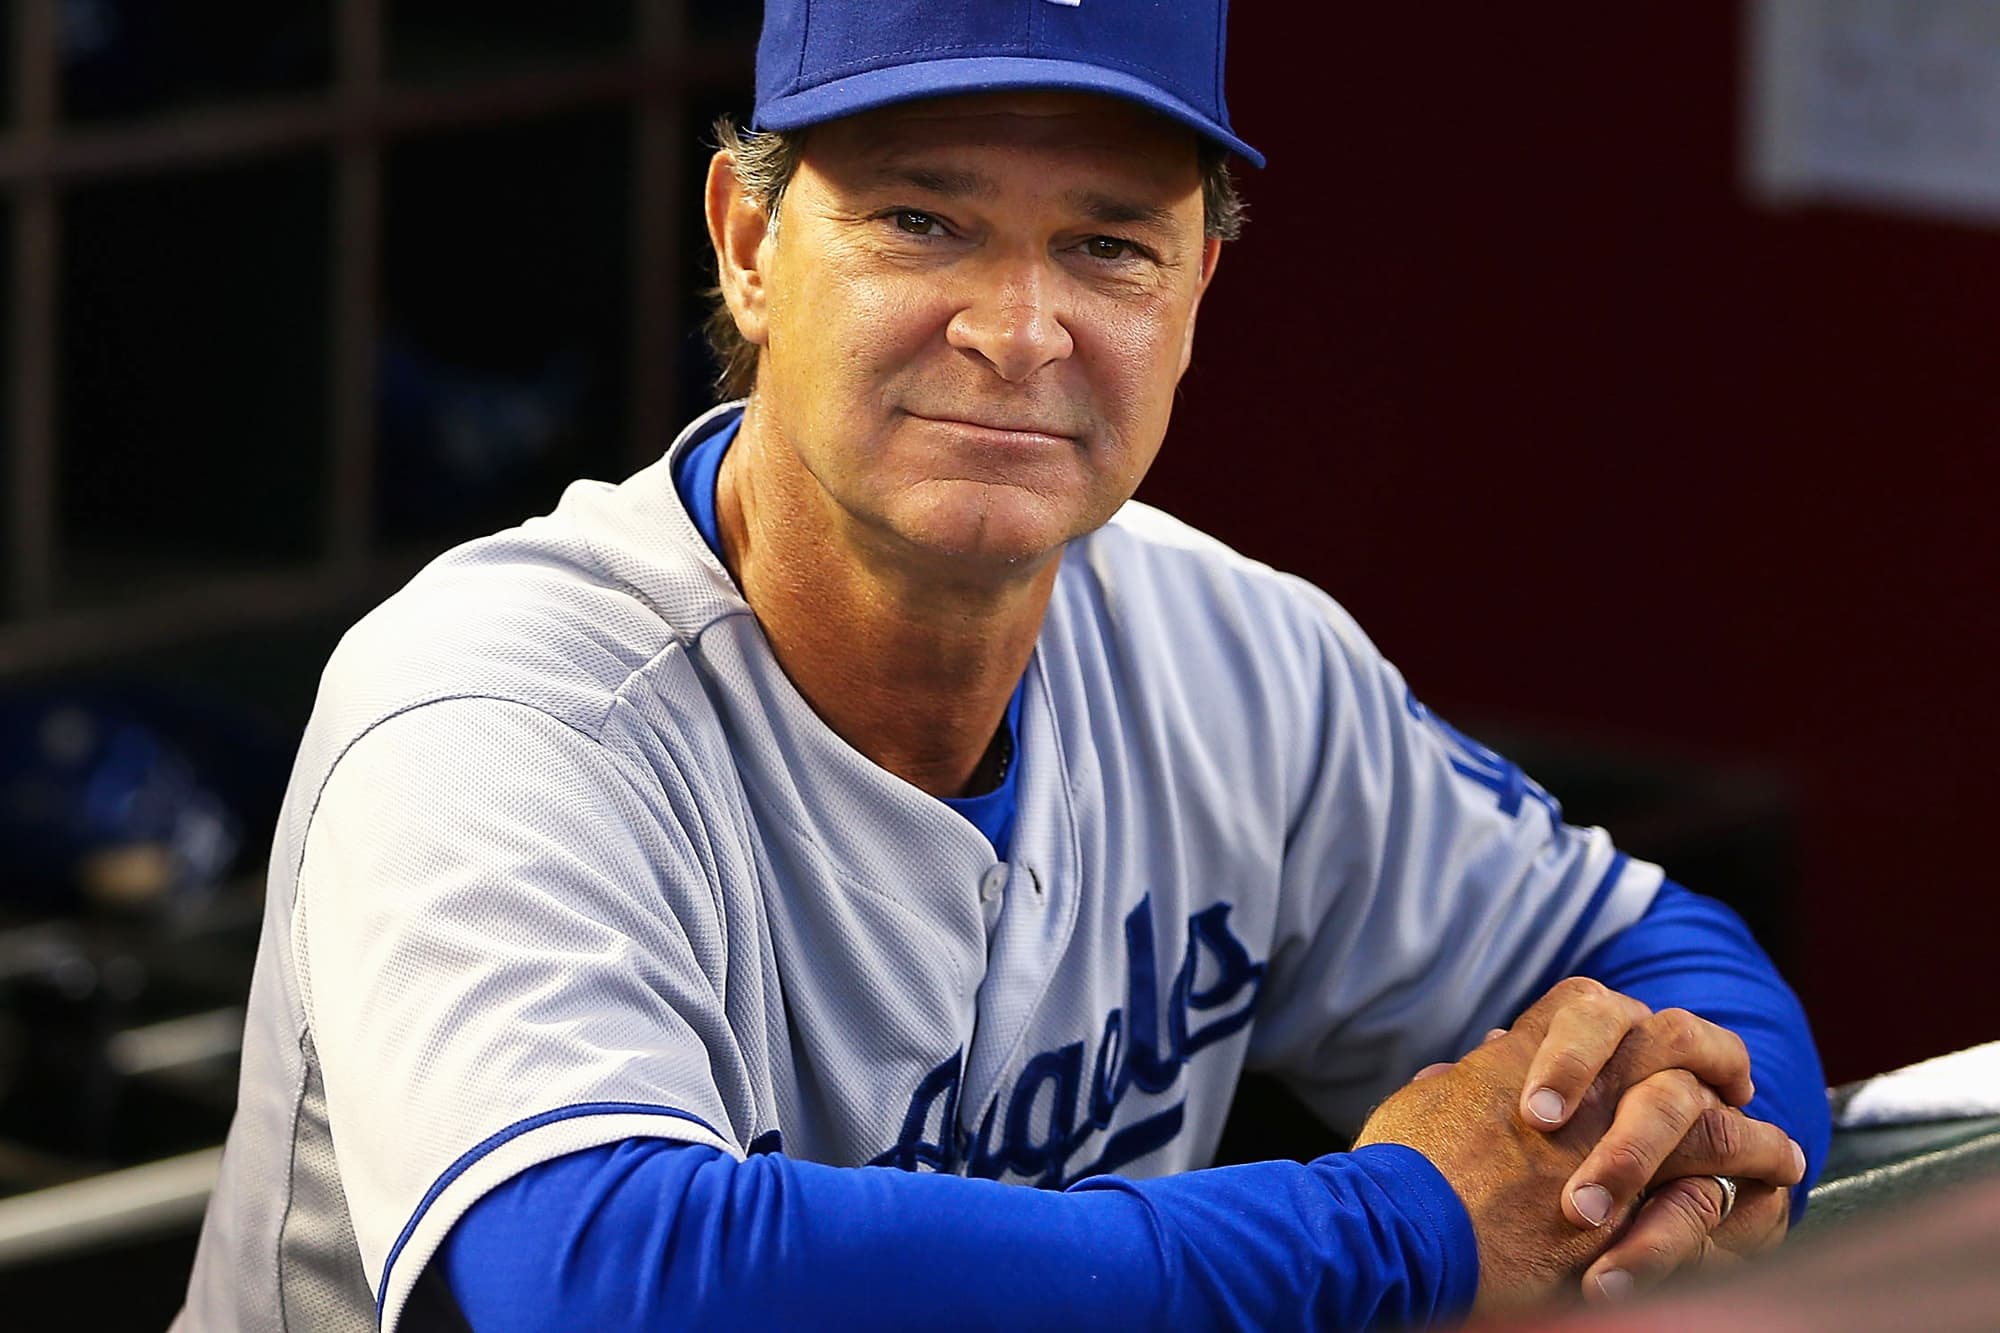 Donnie Baseball: Mattingly on the rejuvenated Dodgers